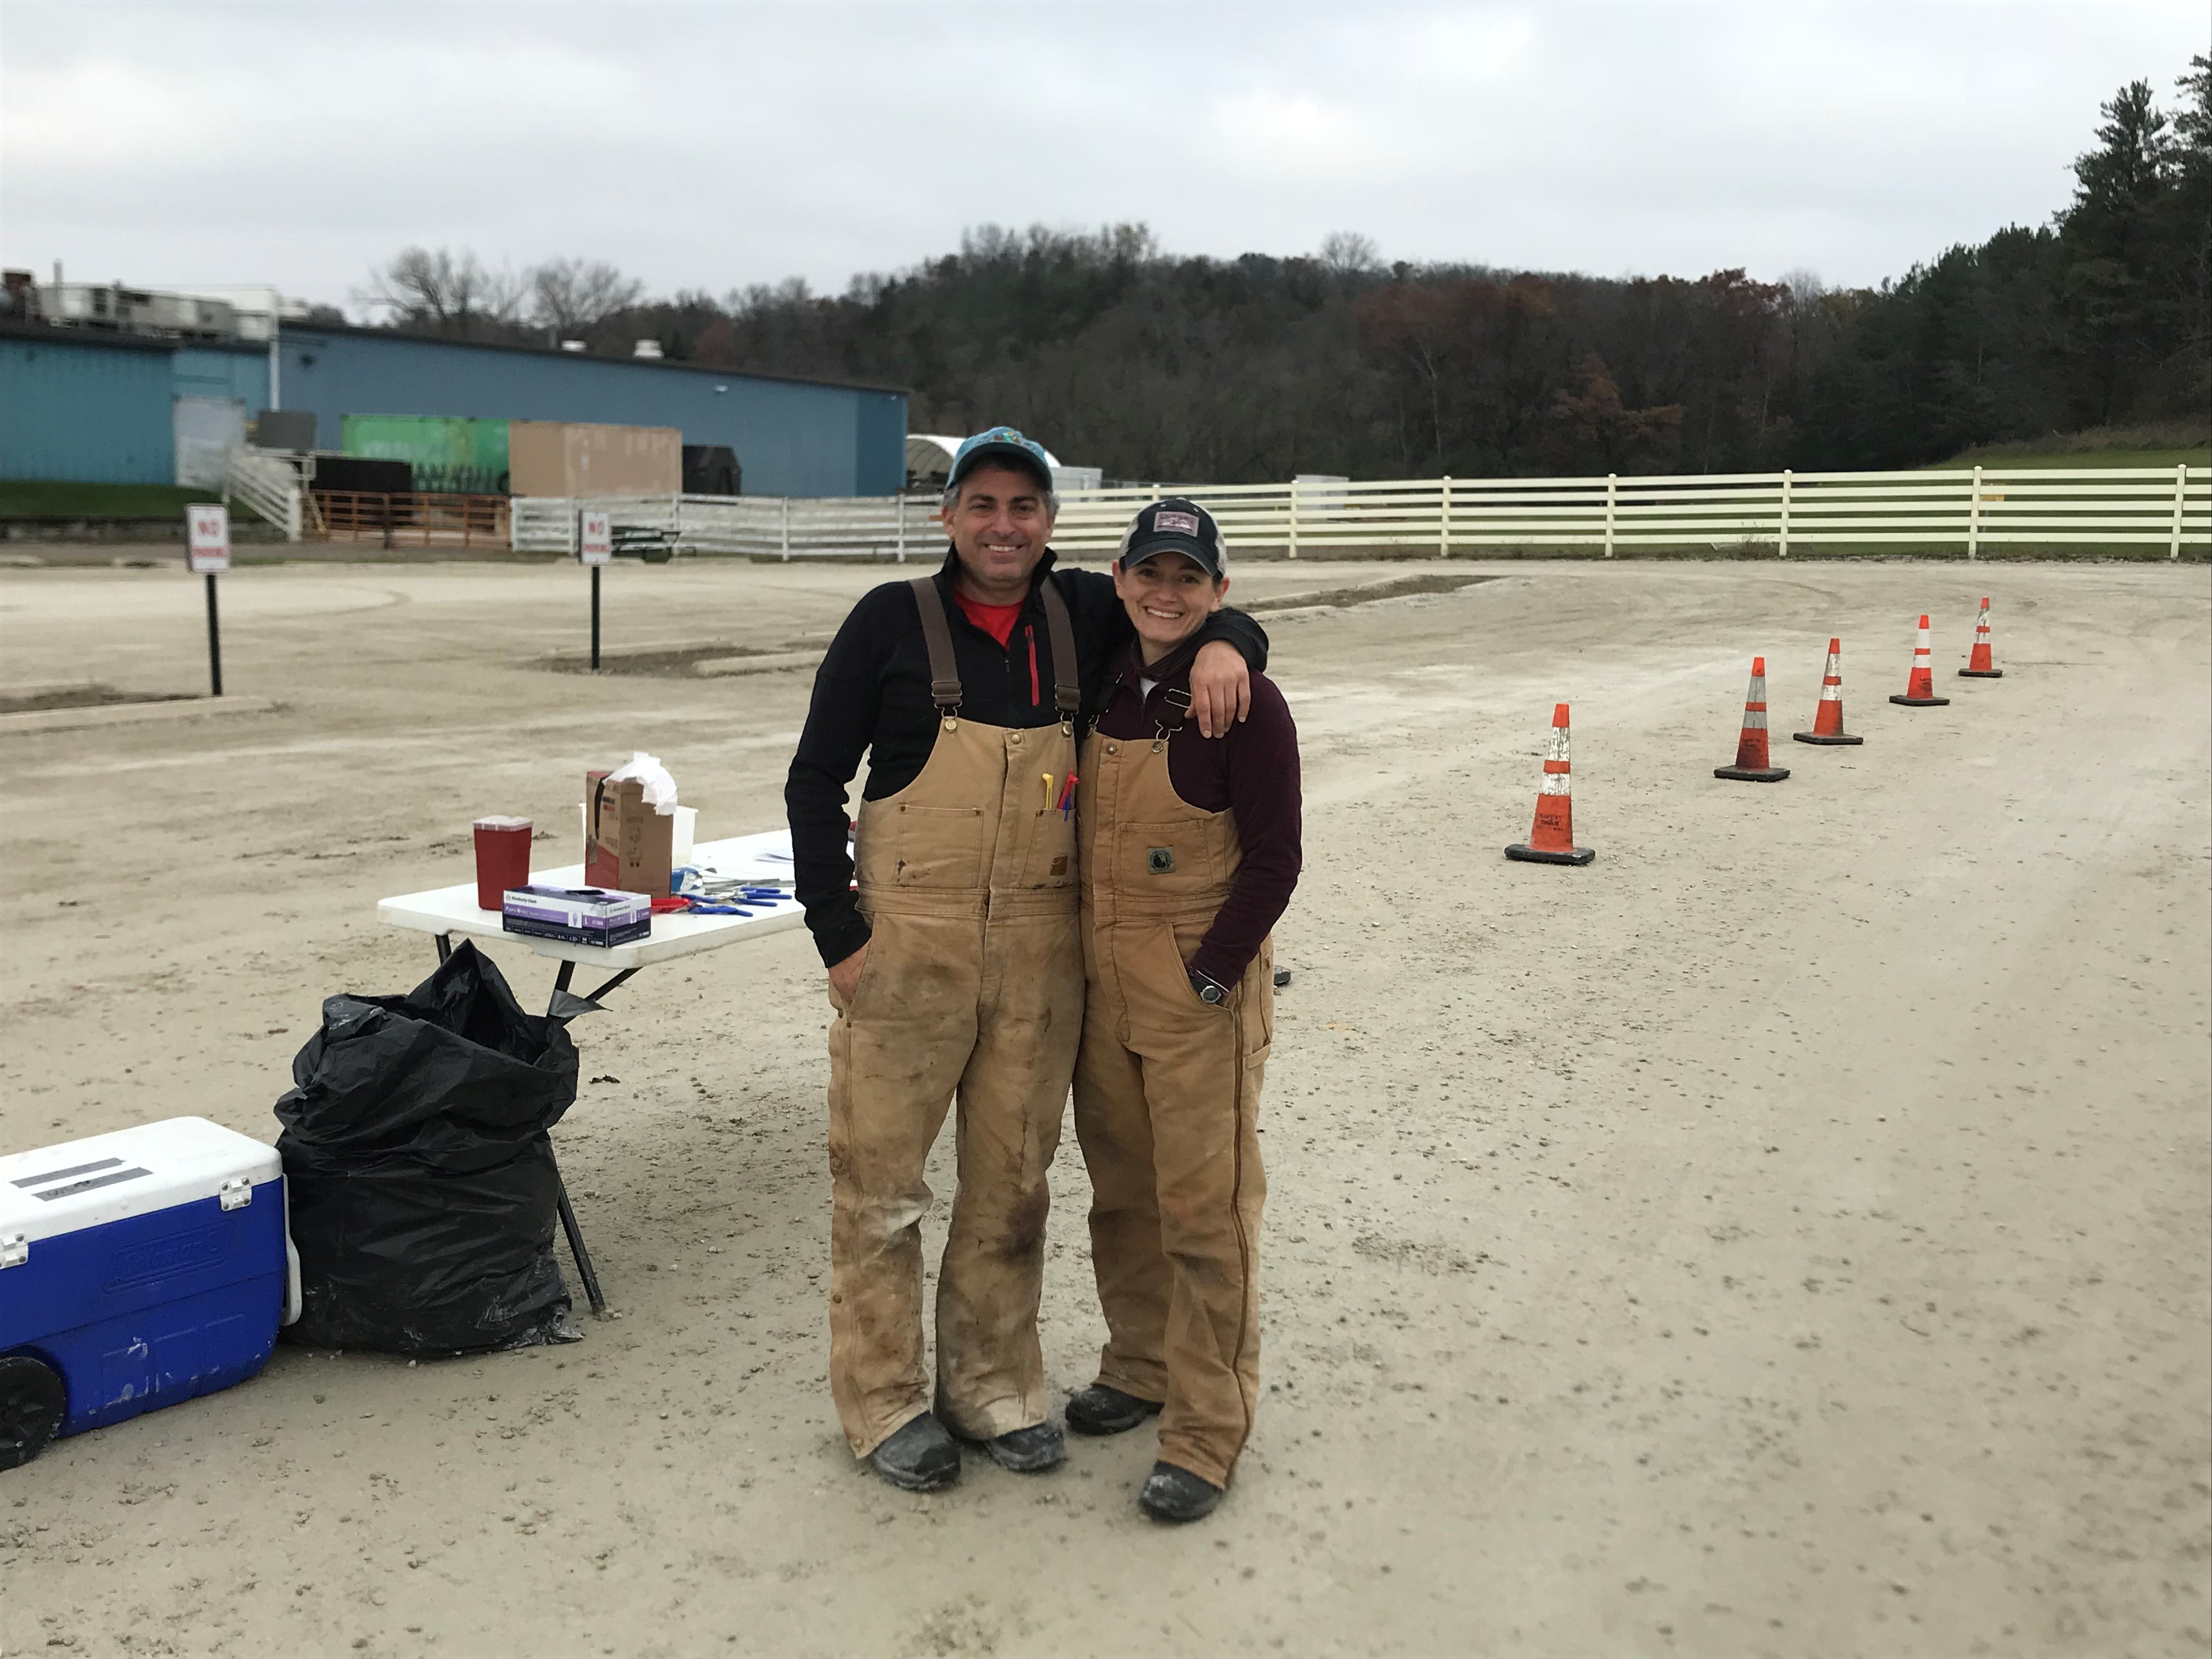 Lou and Larissa working a CWD check station